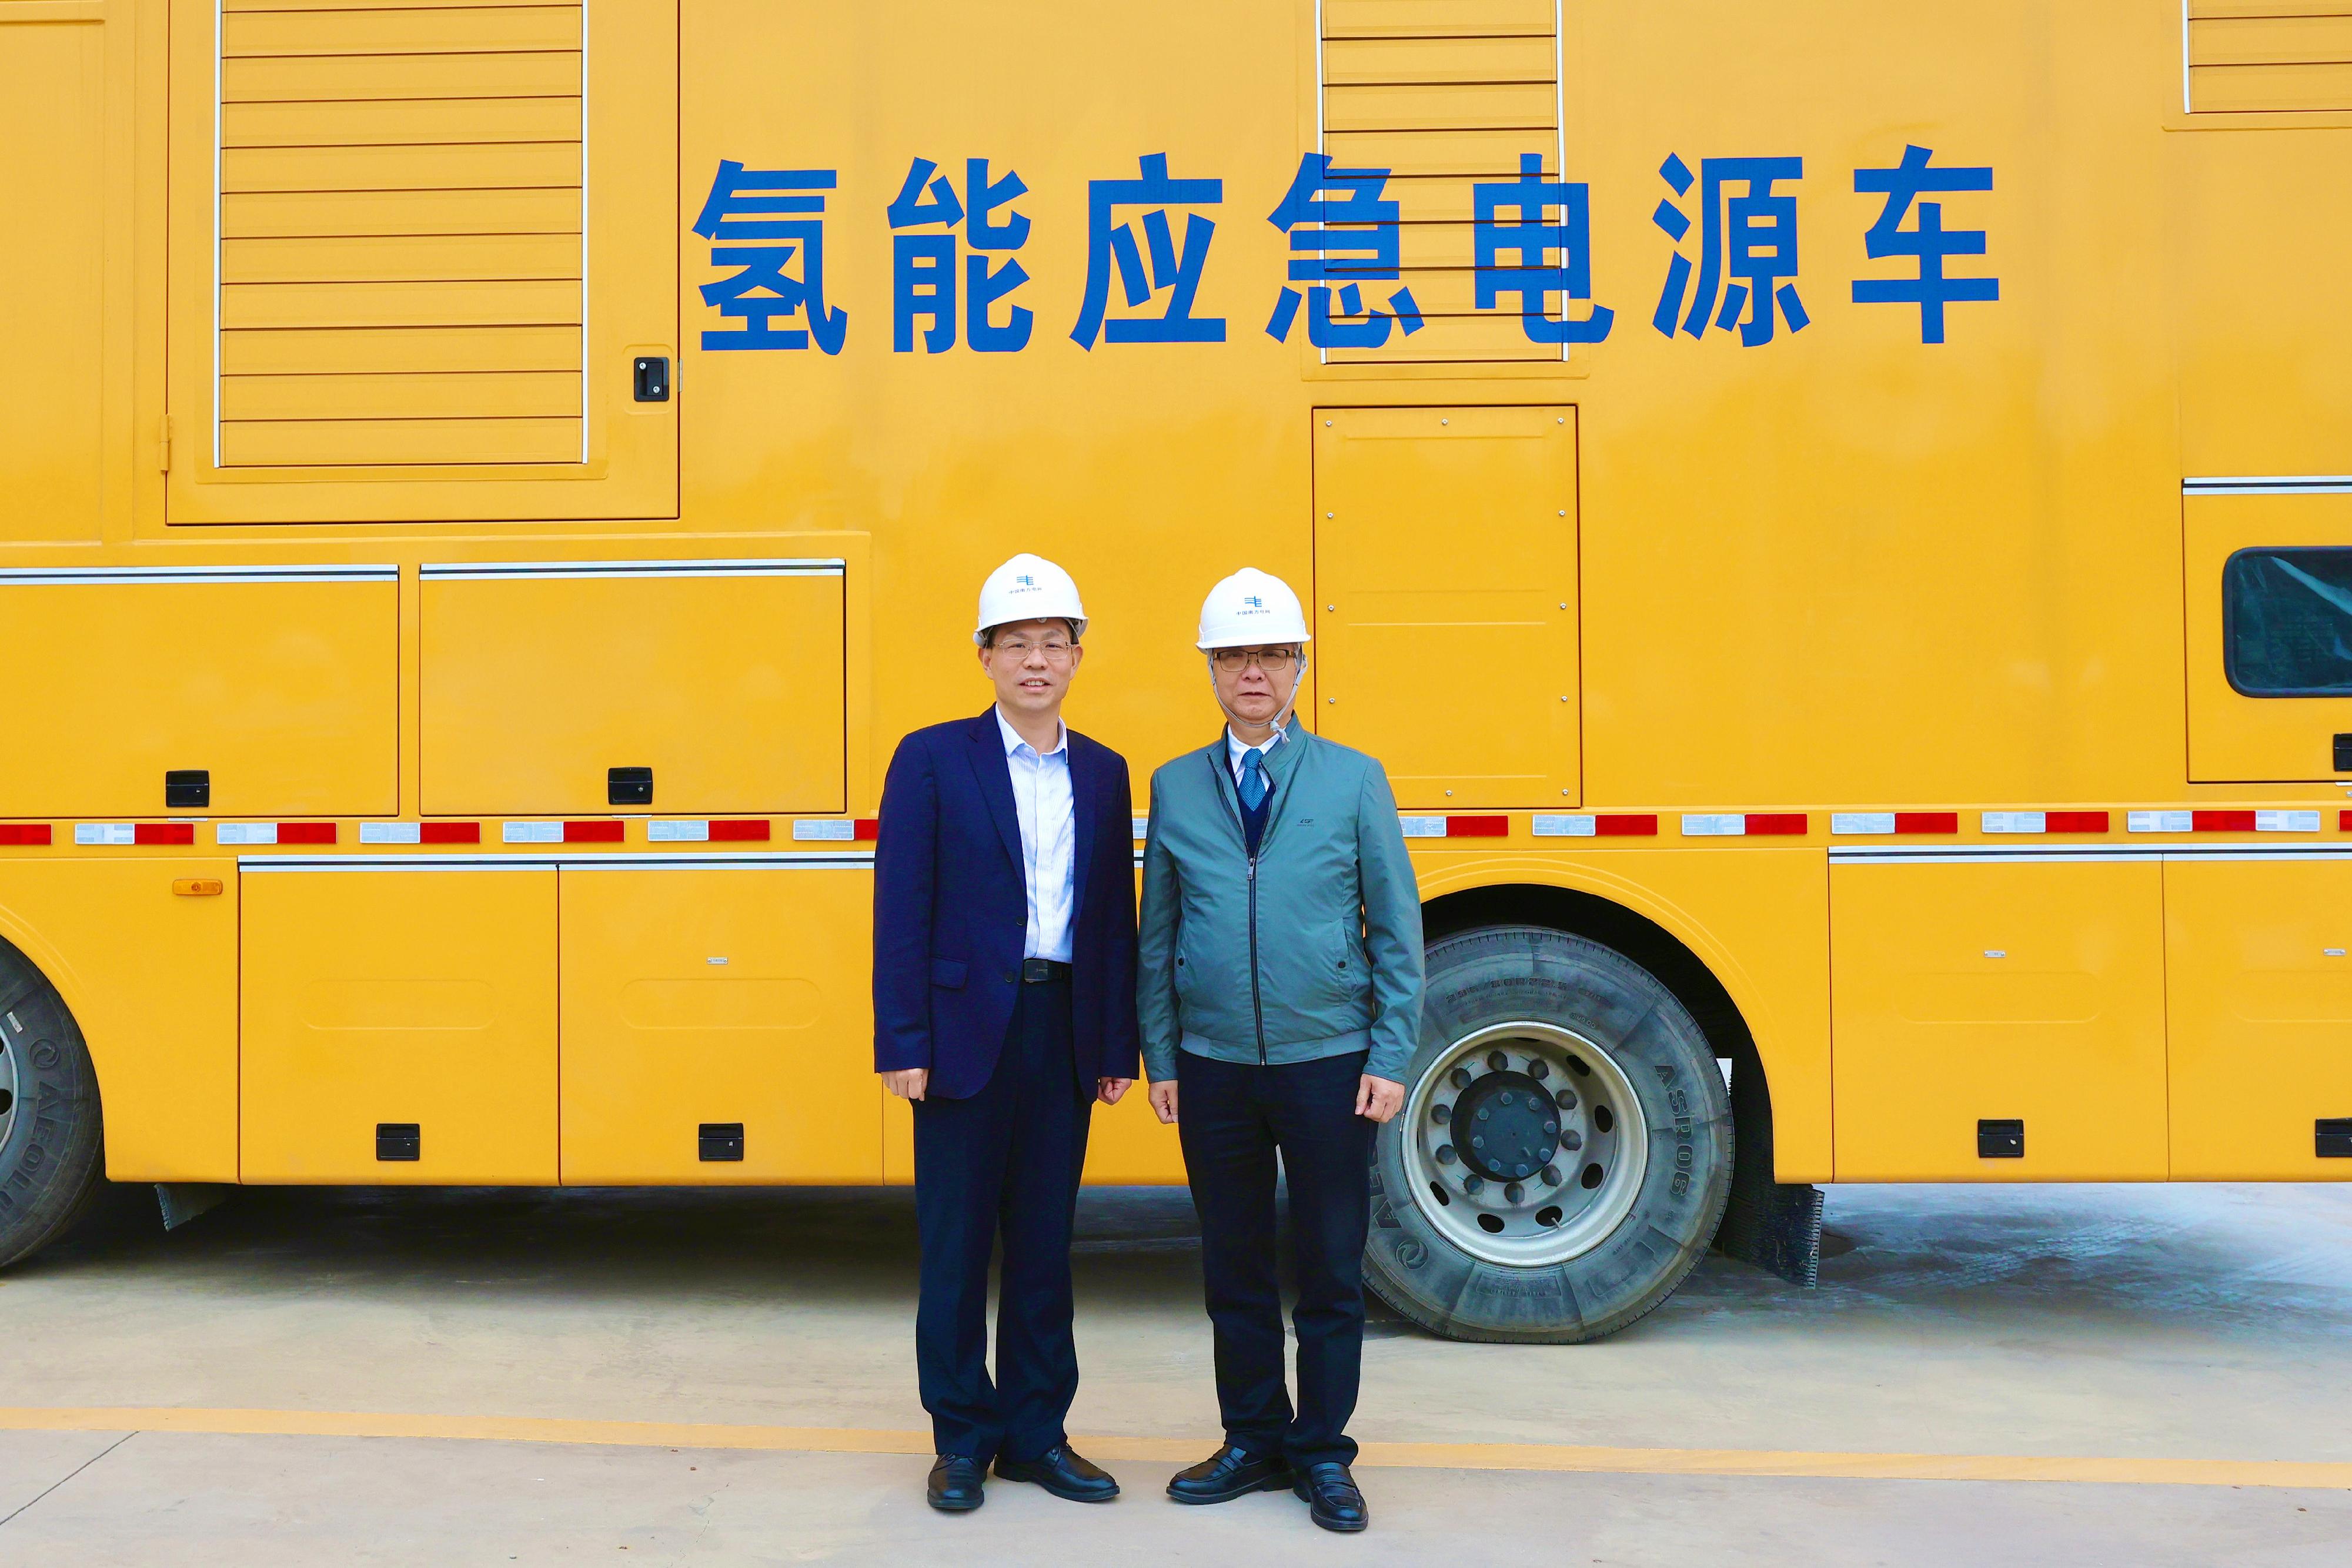 The Secretary for Environment and Ecology, Mr Tse Chin-wan, visited the energy facilities of the China Southern Power Grid in Zhuhai and Nansha, Guangzhou, in the Guangdong-Hong Kong-Macao Greater Bay Area today (March 7). Photo shows Mr Tse (right), accompanied by the President of the China Southern Power Grid International Co Limited, Mr Chen Shengran (left), touring the Xiaohu Island Electric Hydrogen Smart Energy Station.